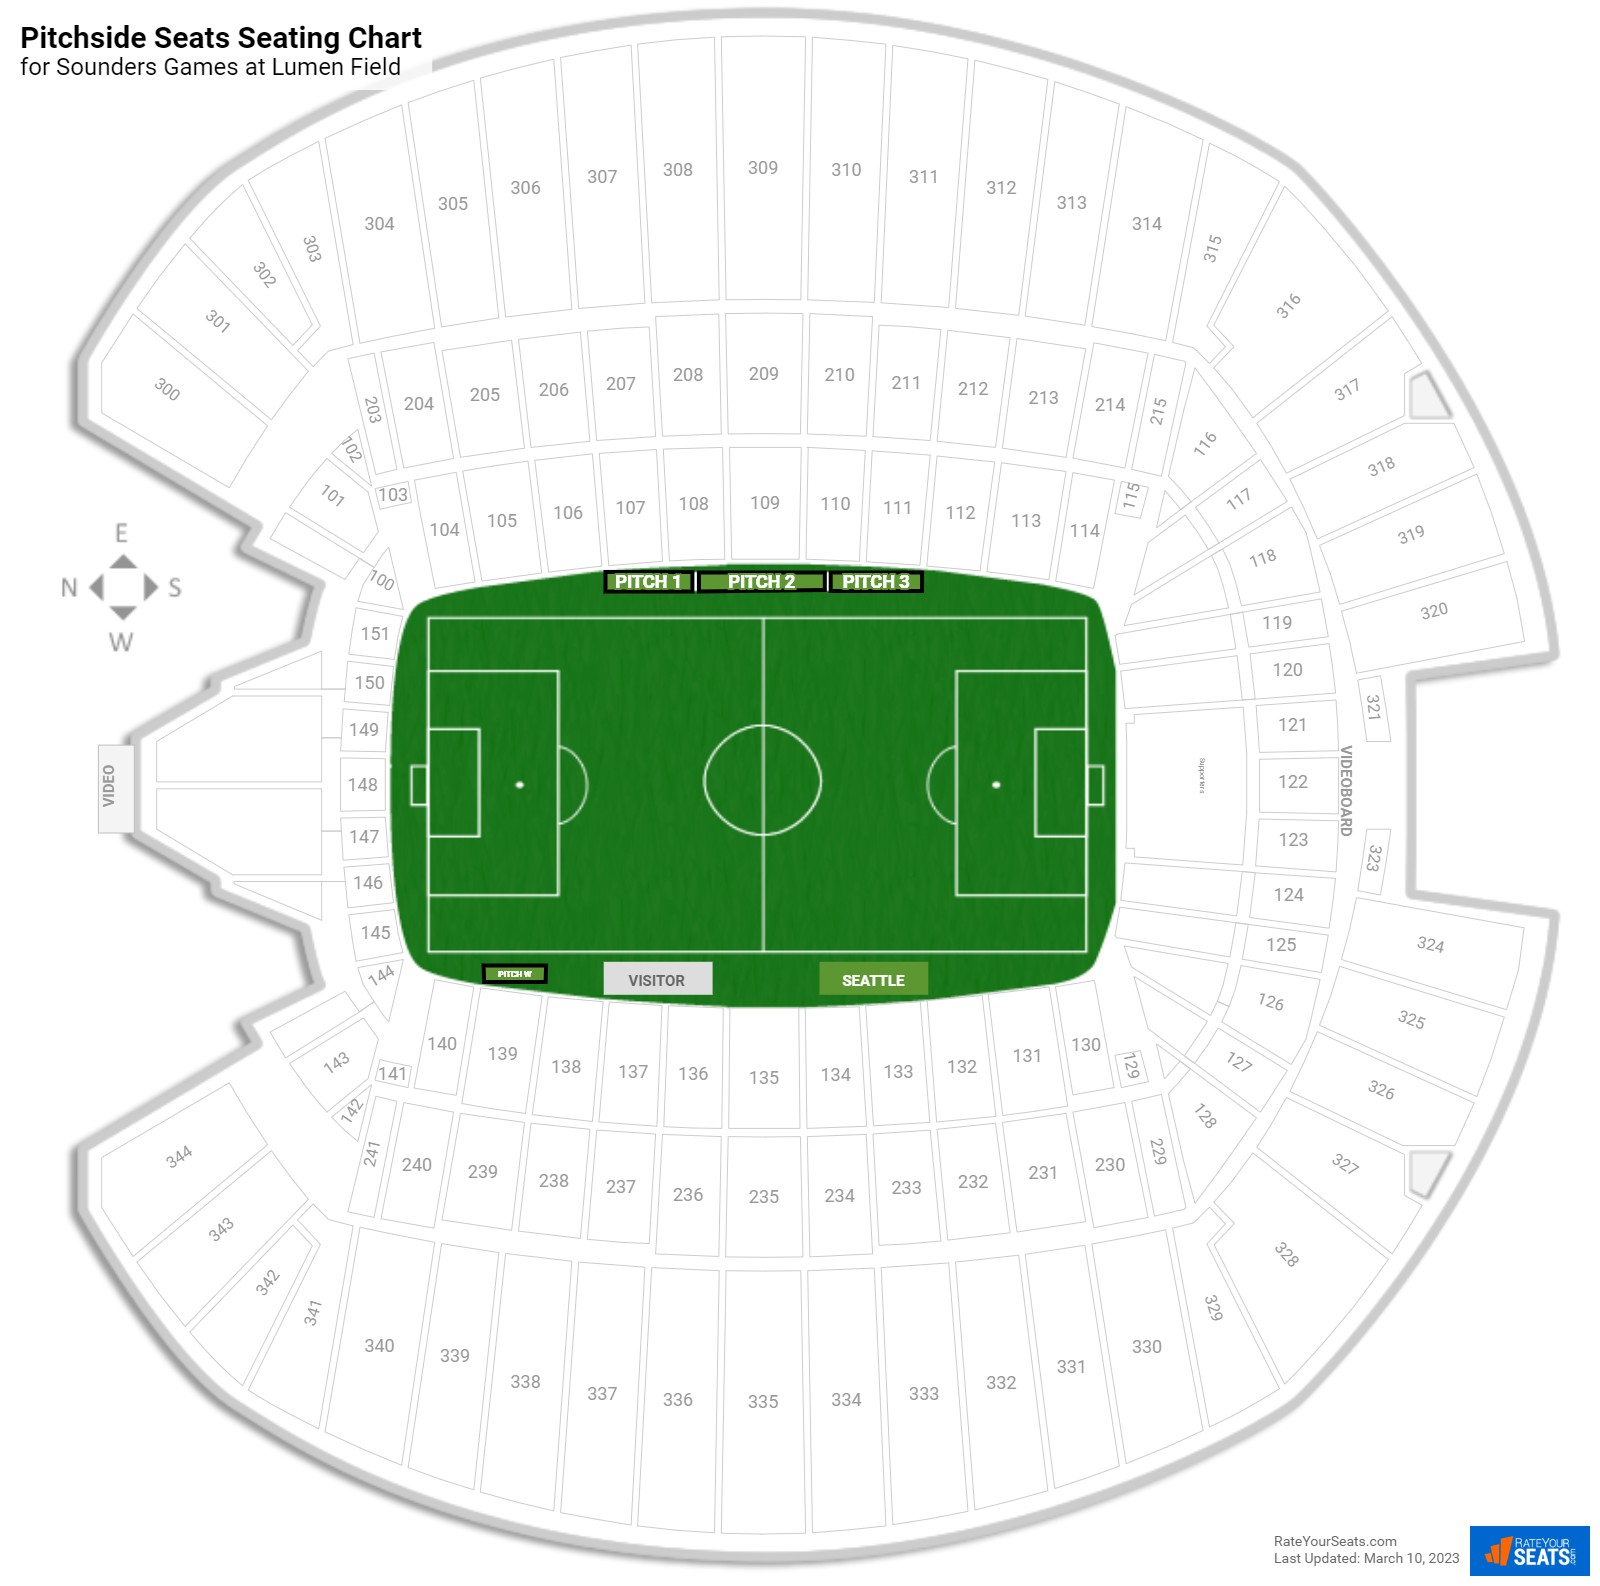 Sounders Pitchside Seats Seating Chart at Lumen Field